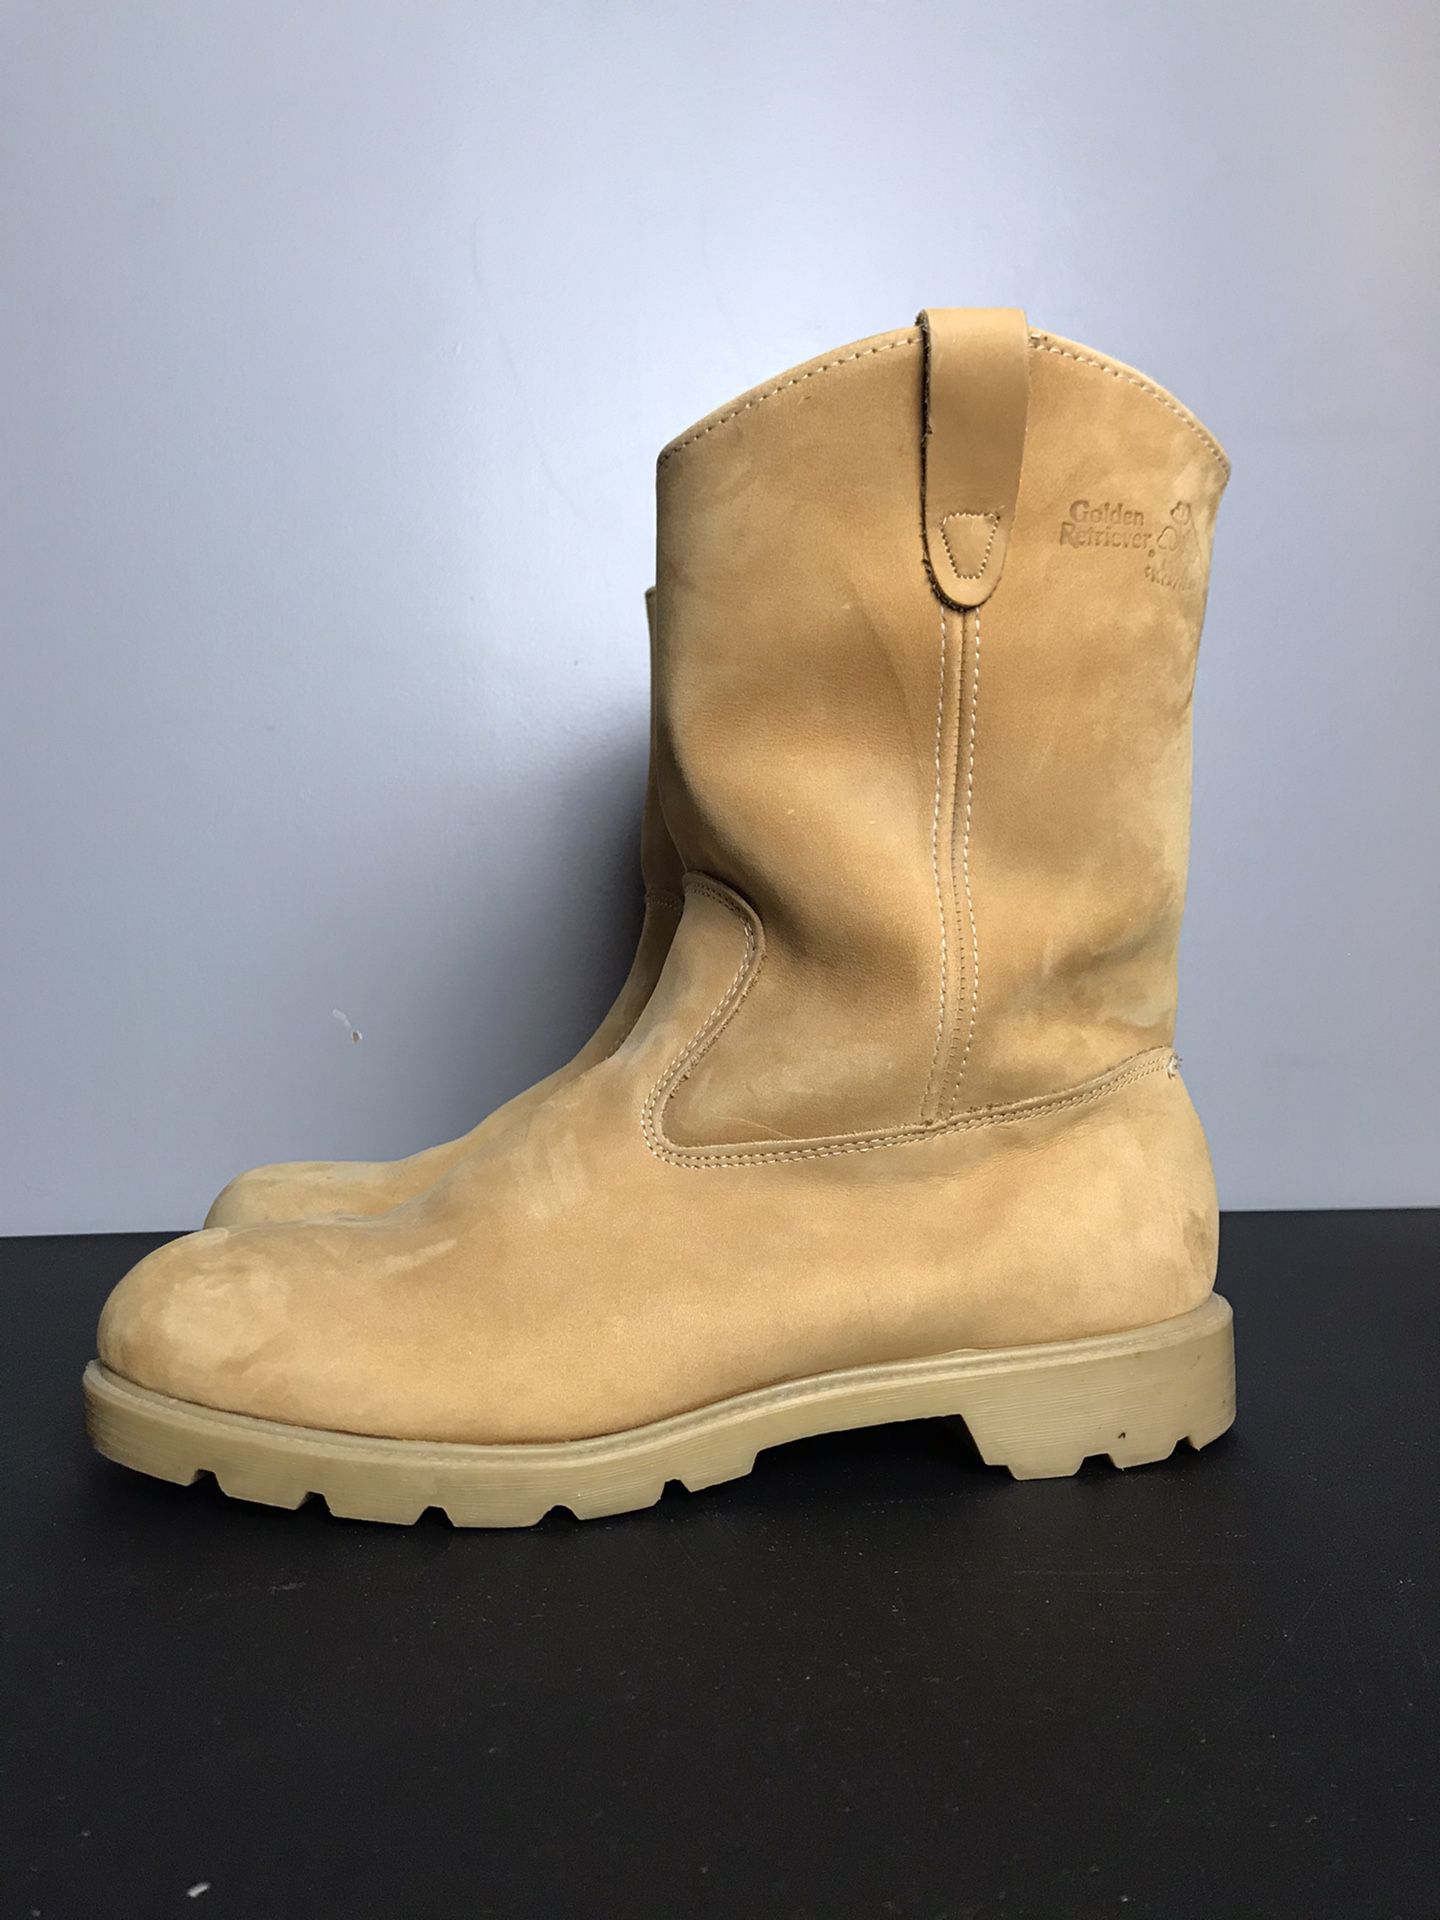 Golden Retriever Tan Work Boots Work boots in gently used condition Definitely has some wear but still sturdy and comfortable Size 13